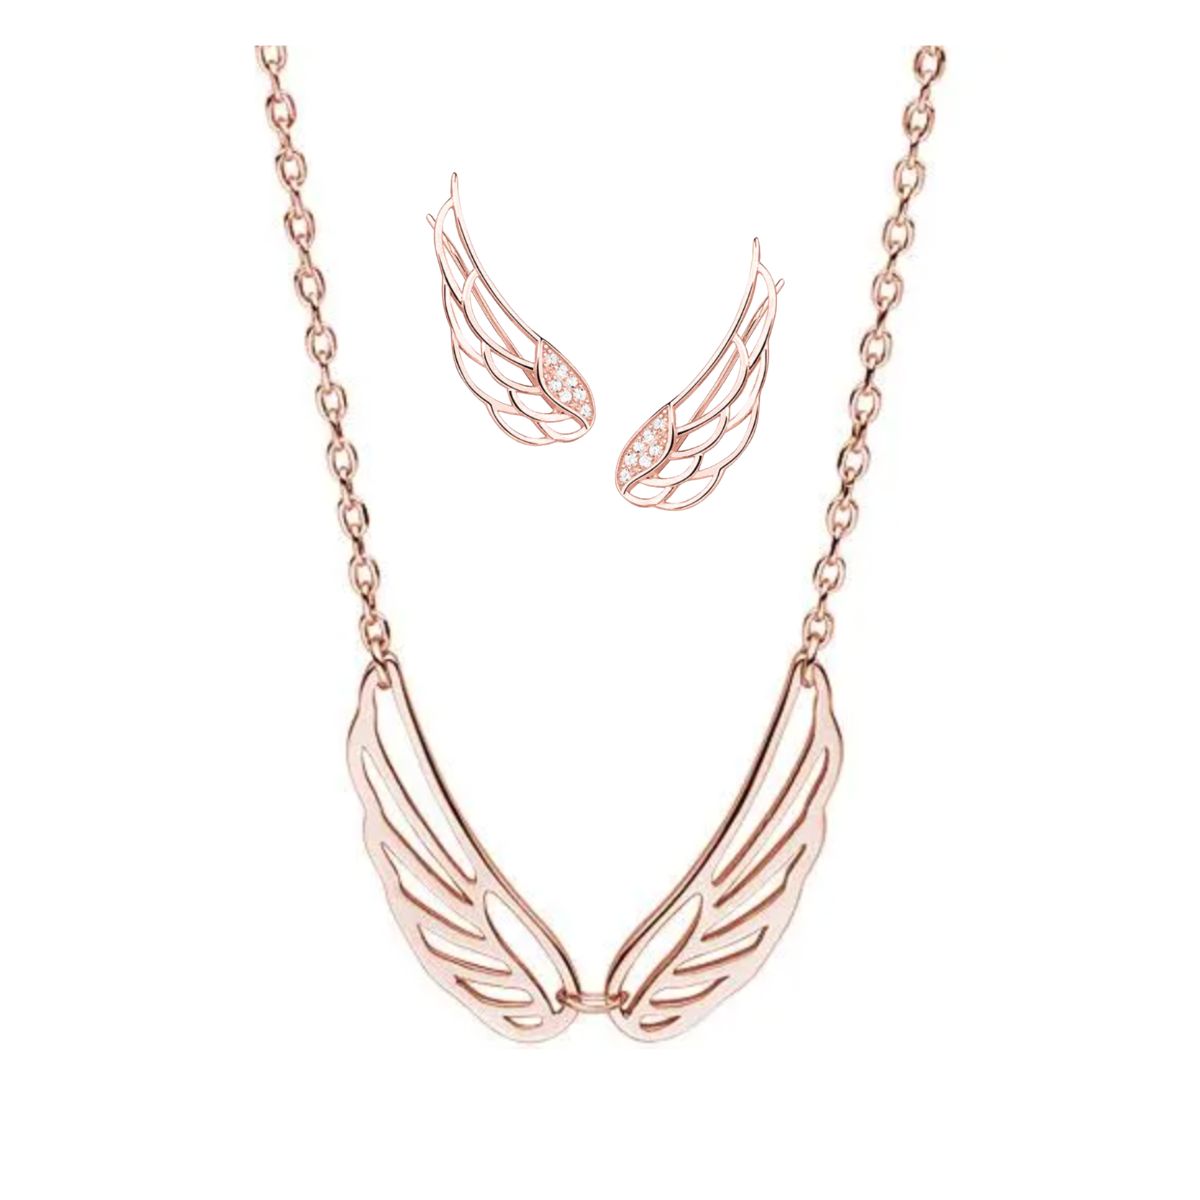 angel wing necklace and ear climber earrings Double Angel Wing Necklace and Ear Climbers – Rose Gold Plated - ασήμι 925